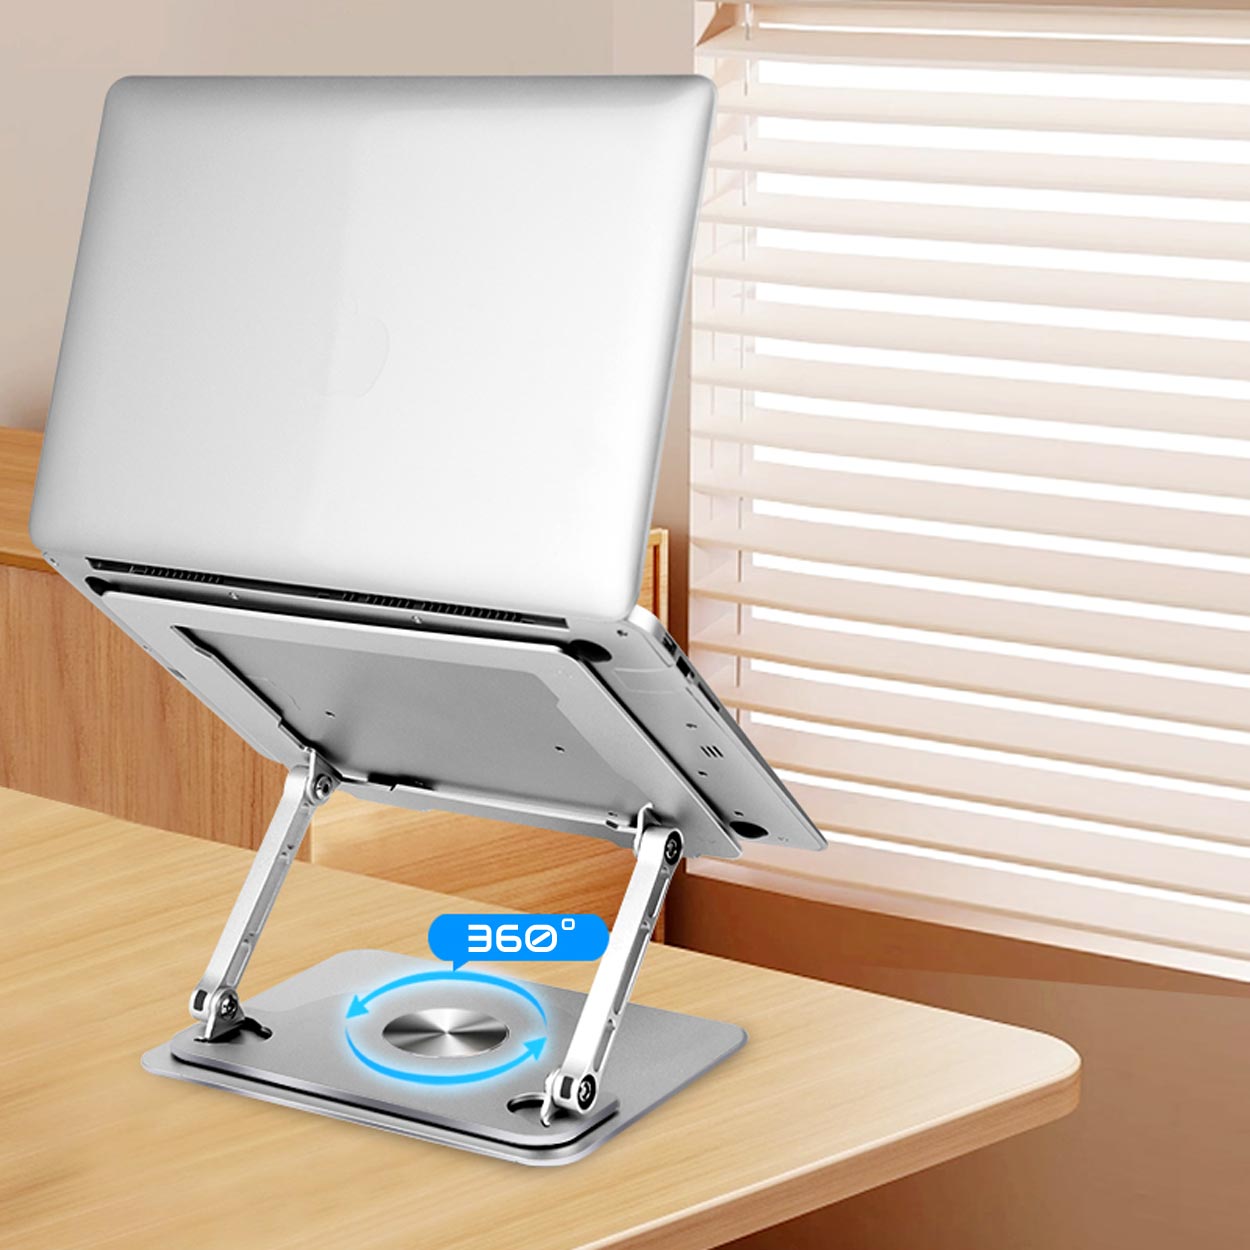 Adjustable Laptop Stand with 360 Rotating Base - 6